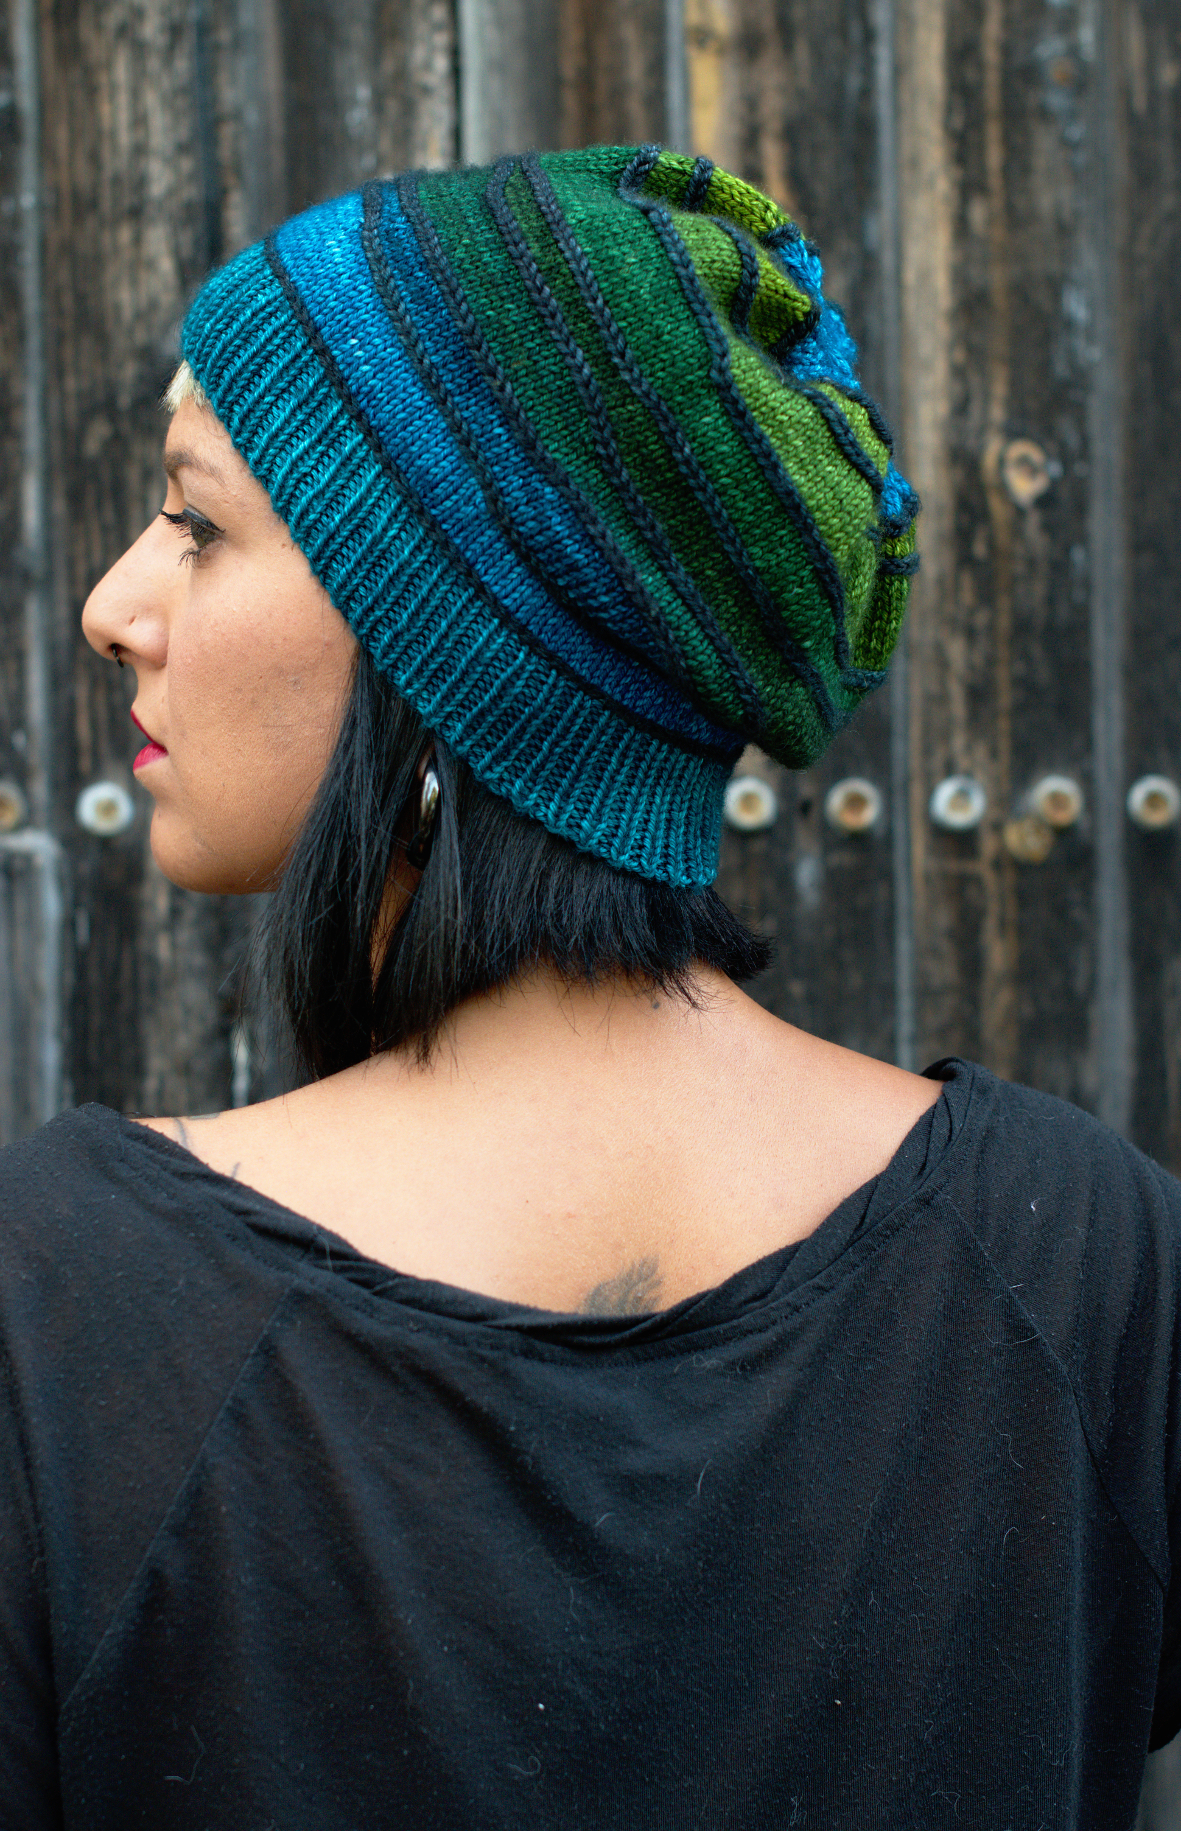 Contoura hand knitted Hat pattern featuring short rows